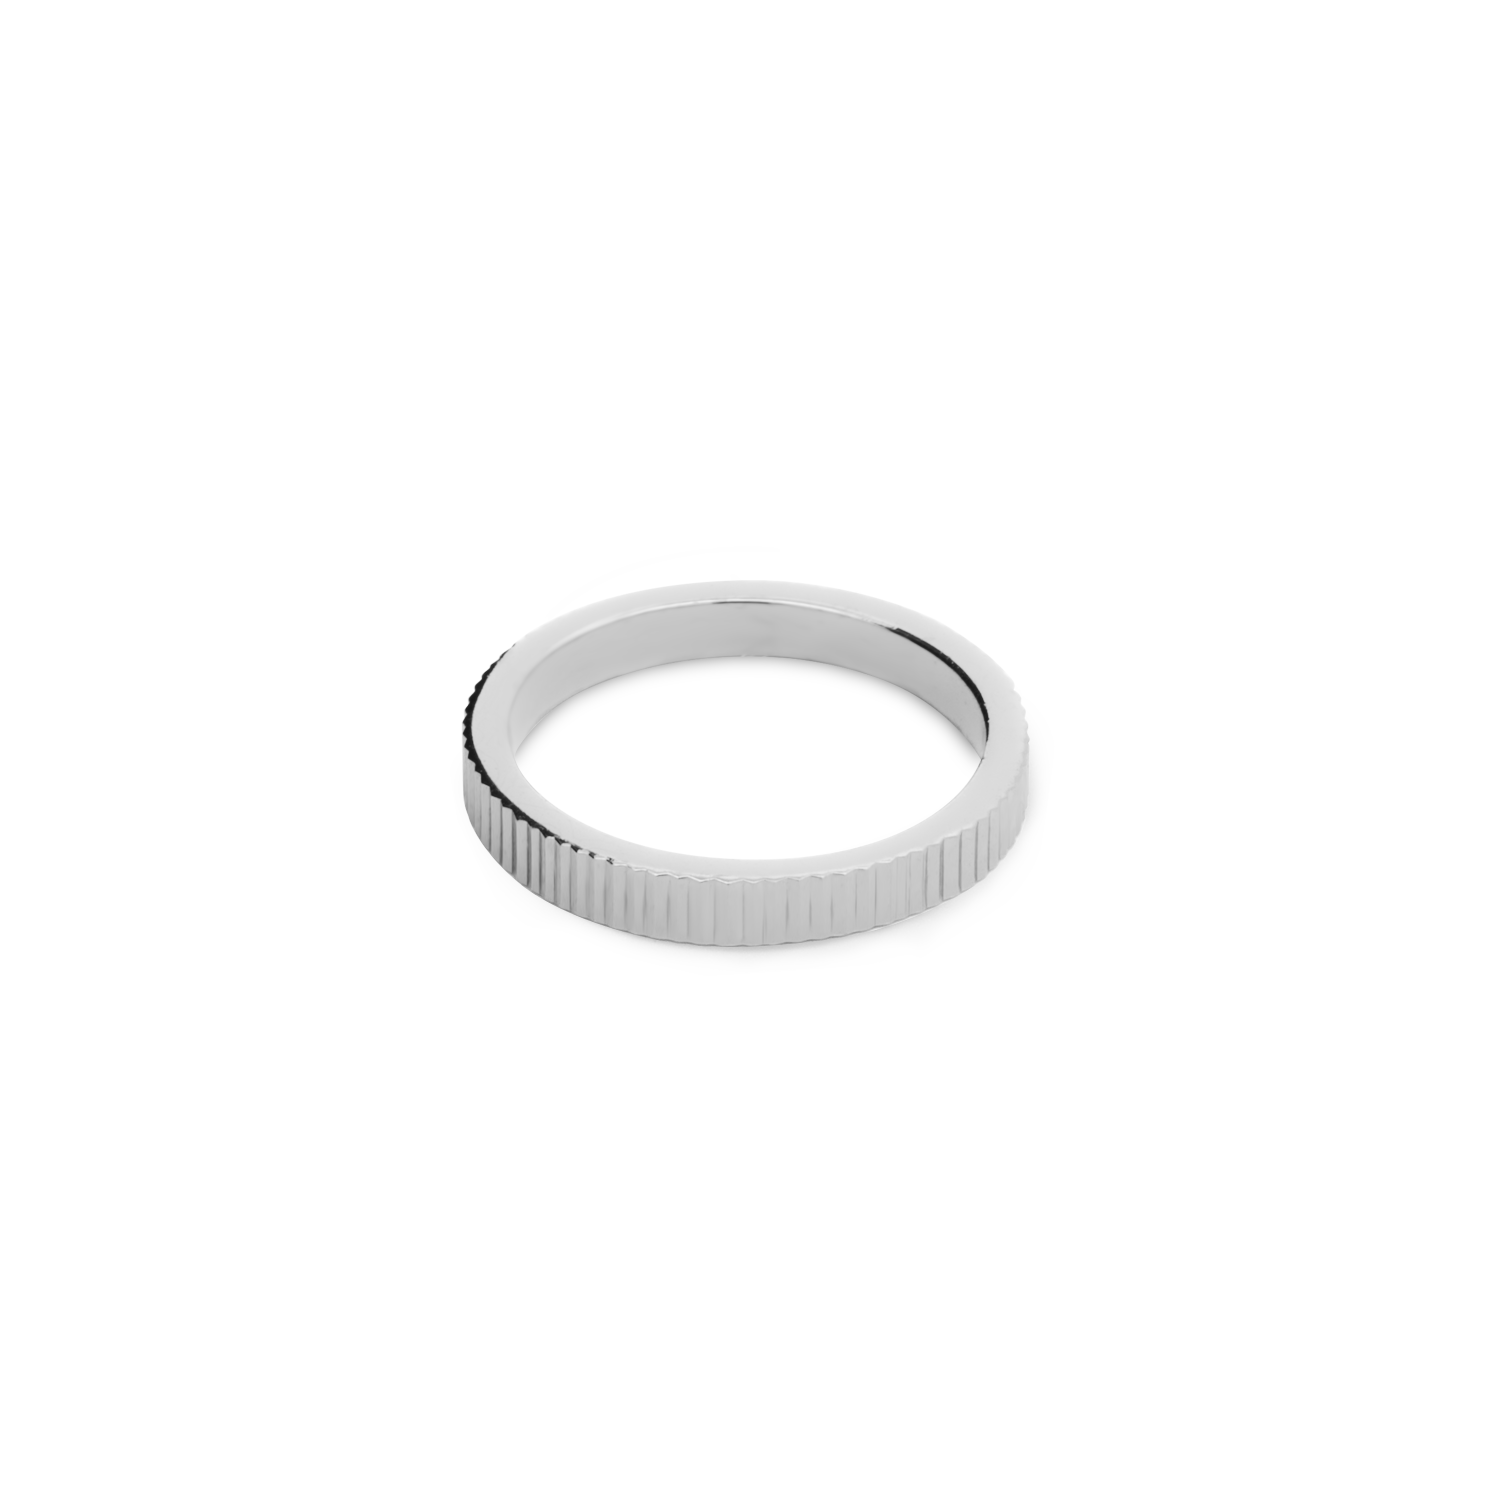 Elegant and statement textured ring in 925 silver.